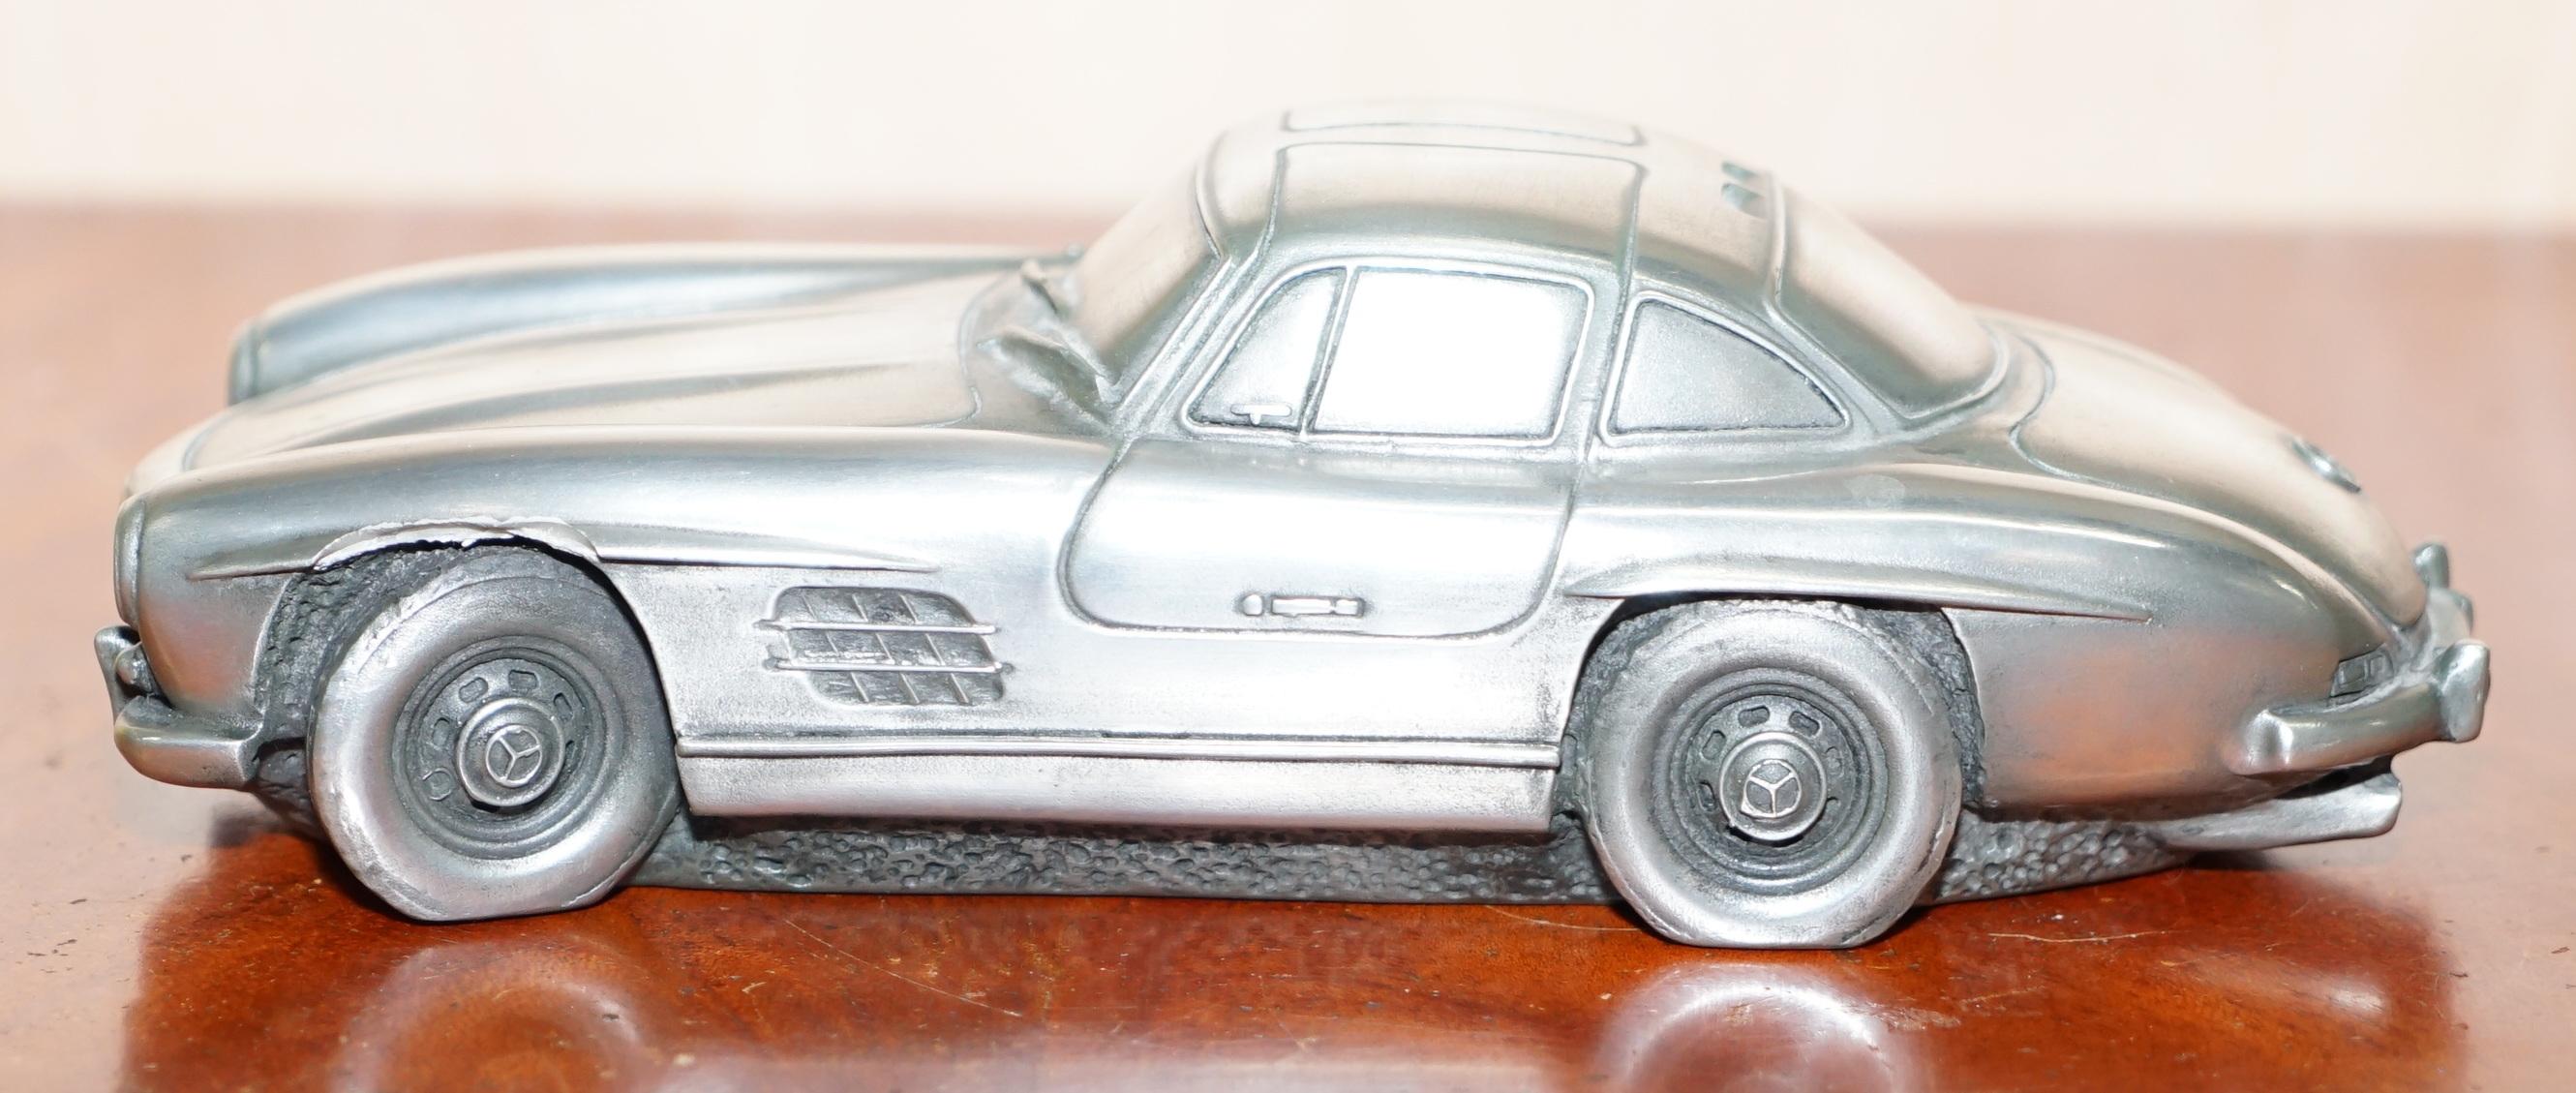 20th Century Compulsion Gallery Pewter a Mercedes Benz Gullwing Coupe 300SL 1954-1957 Car